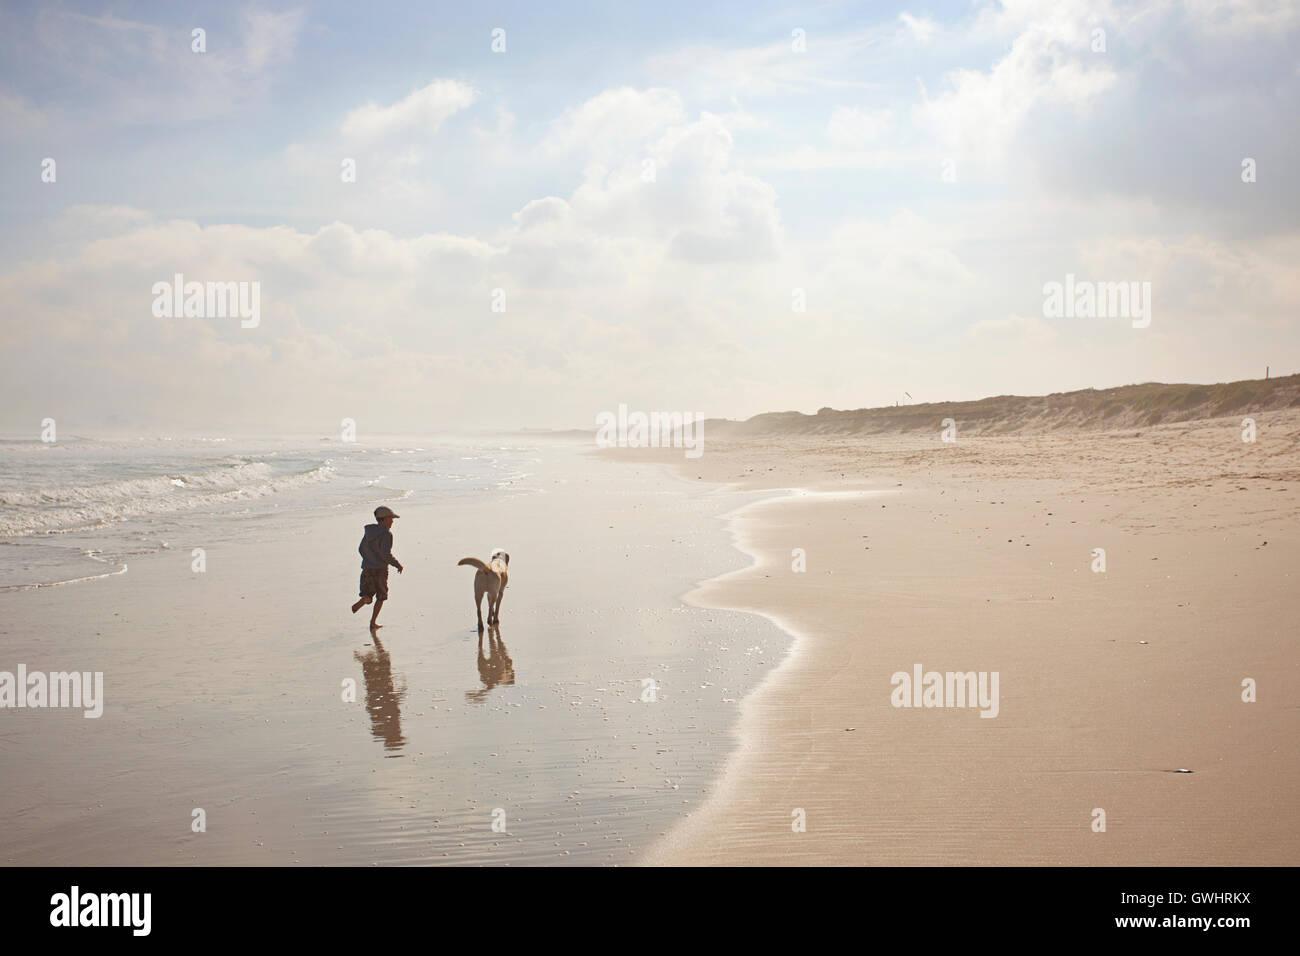 Young boy running dog on the beach, Milnerton Beach, South Africa Stock Photo